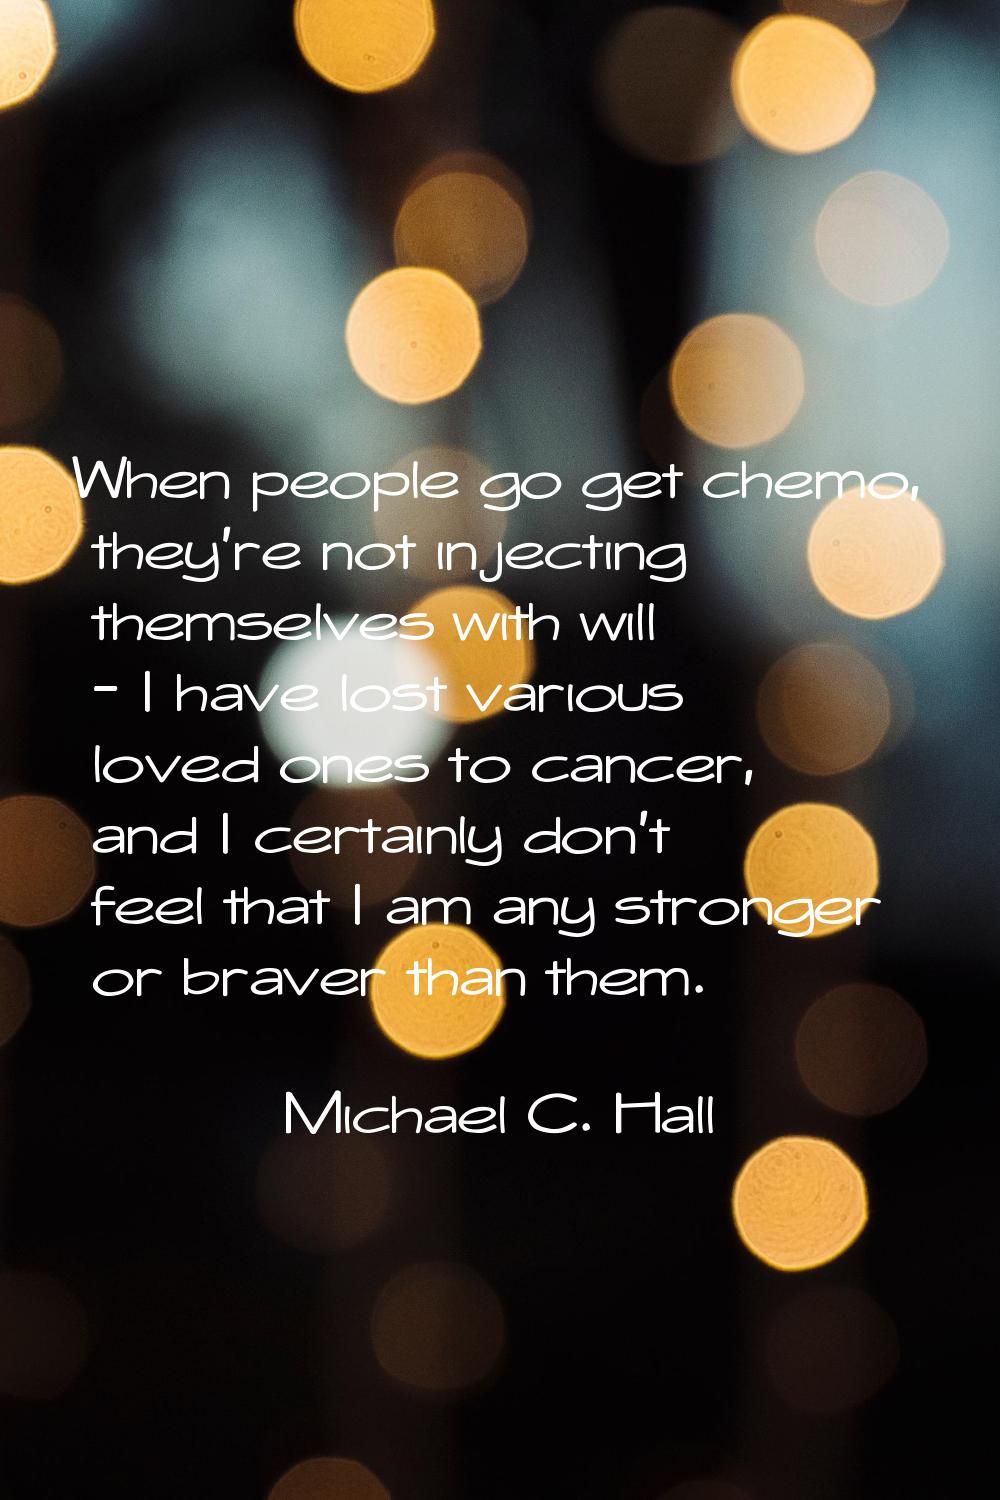 When people go get chemo, they're not injecting themselves with will - I have lost various loved on